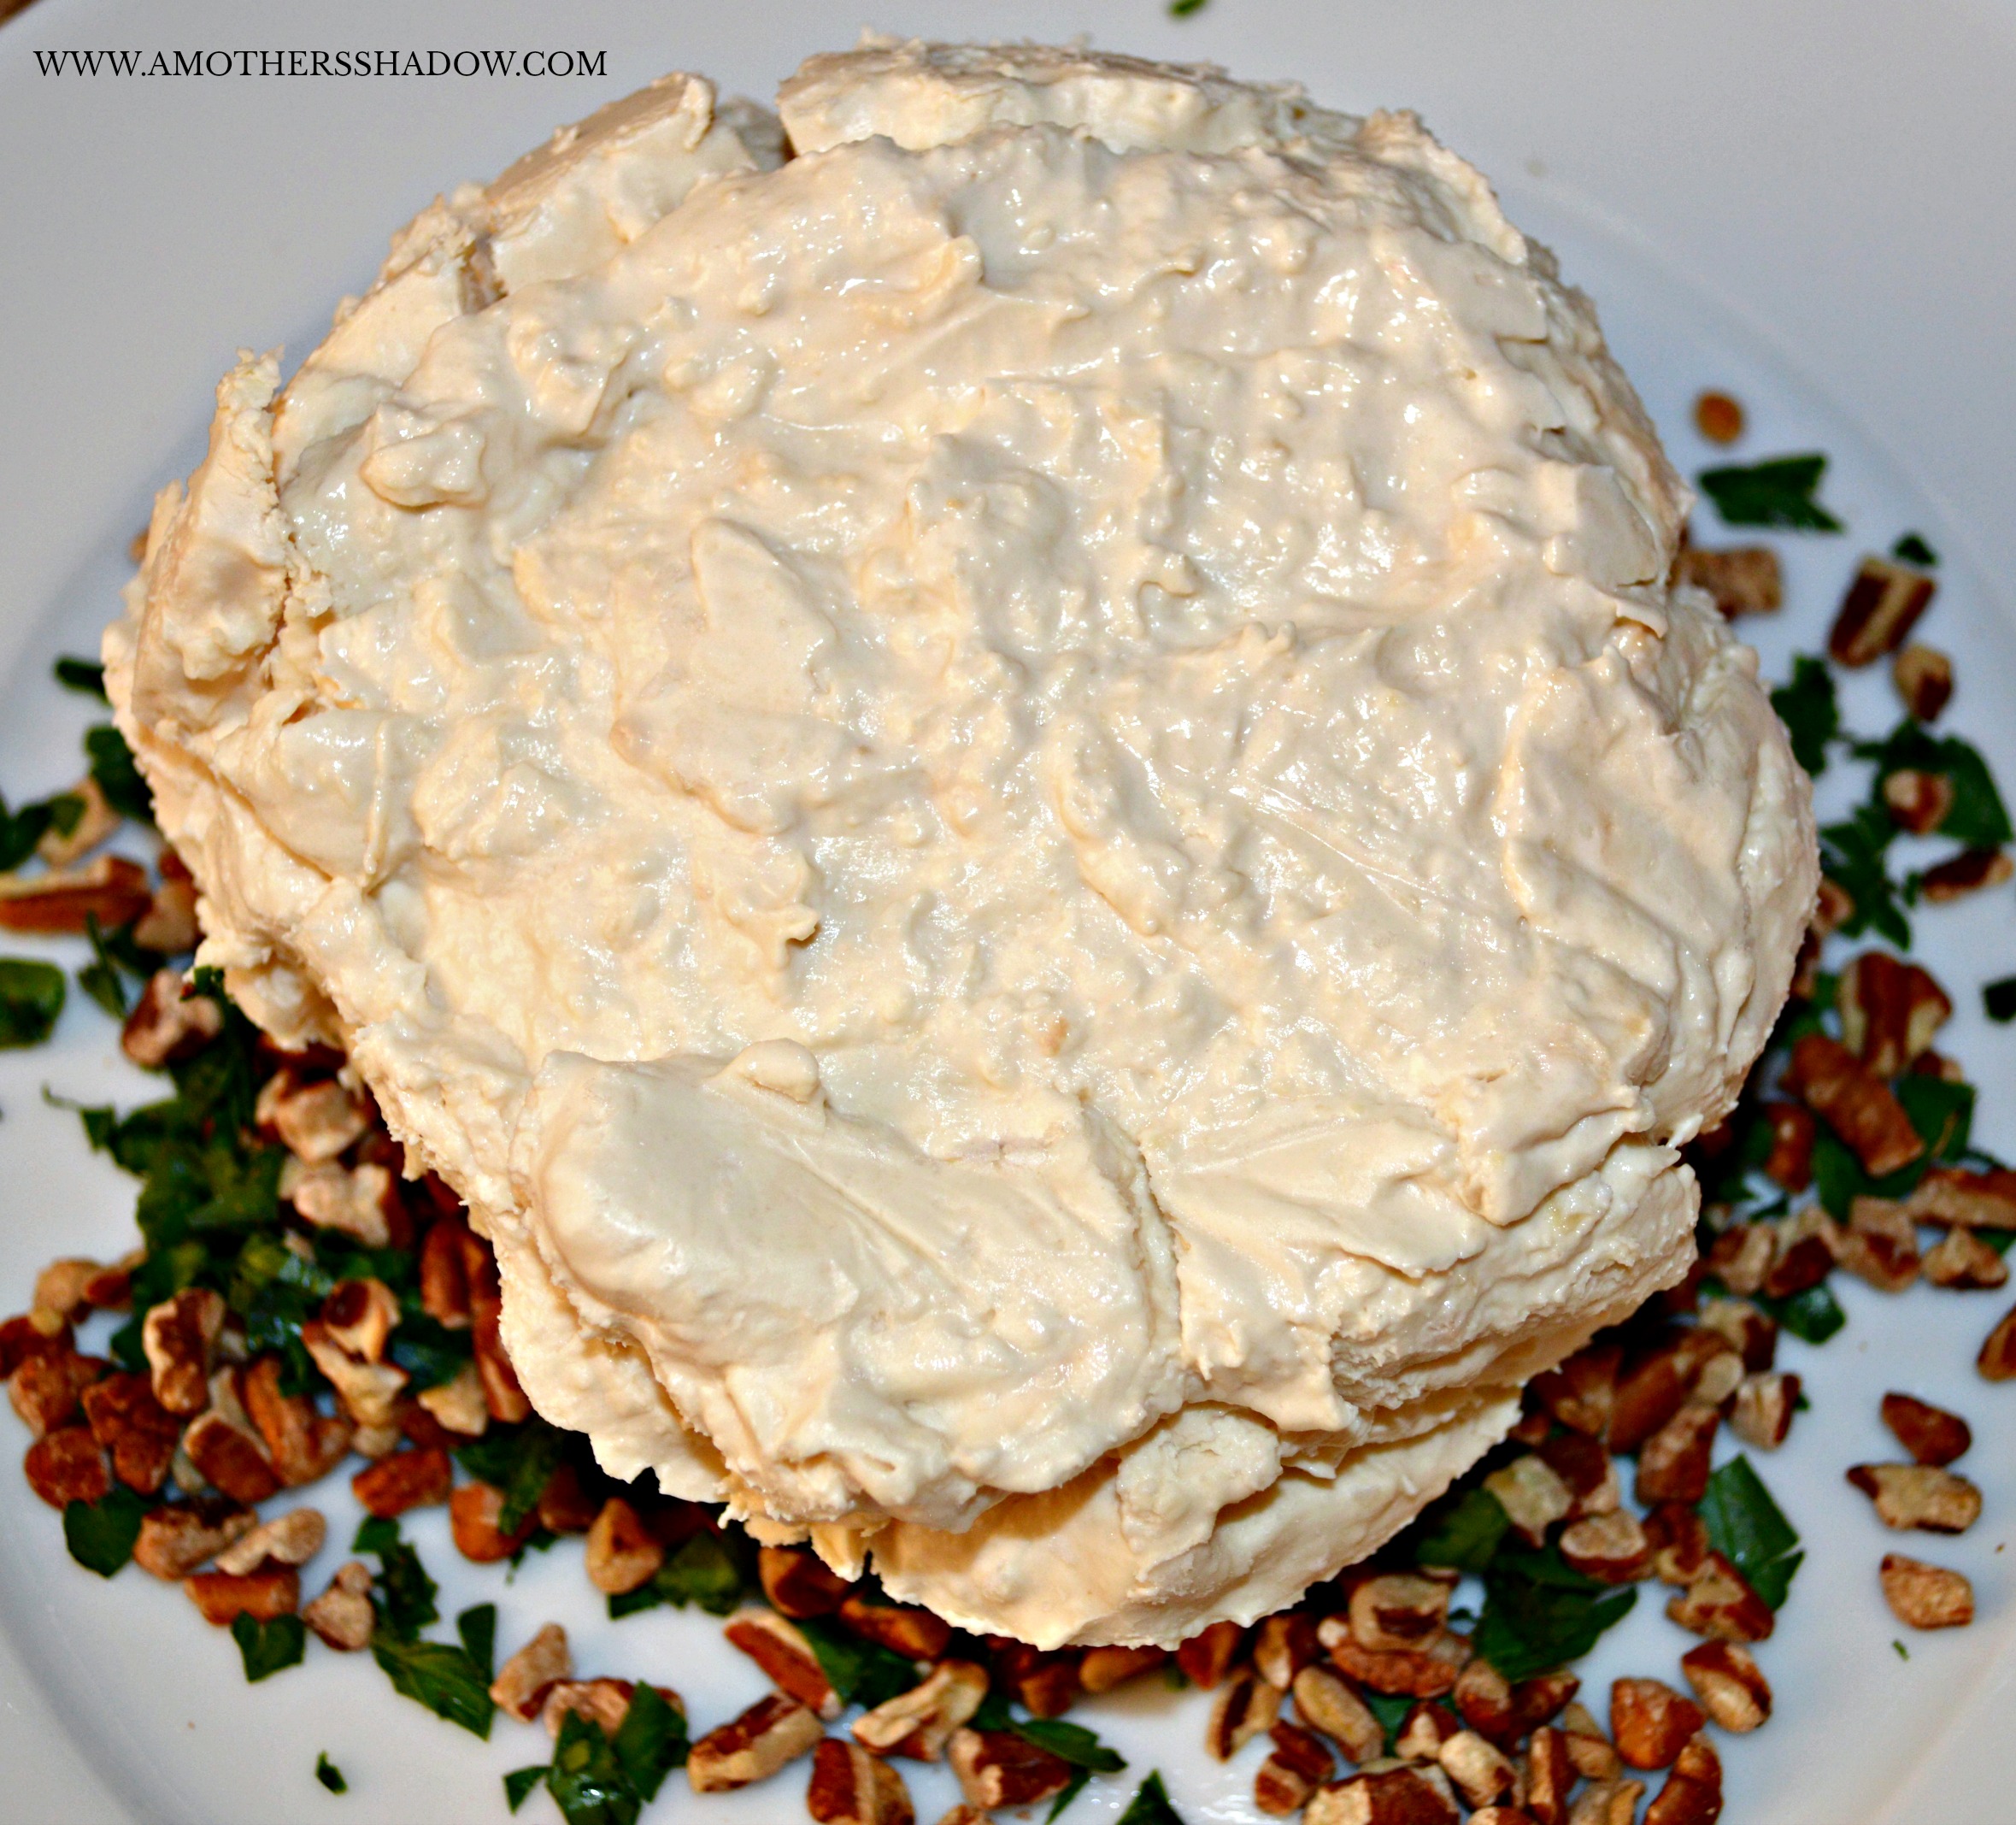 Cheese Ball with Asiago Cheese and Roasted Garlic